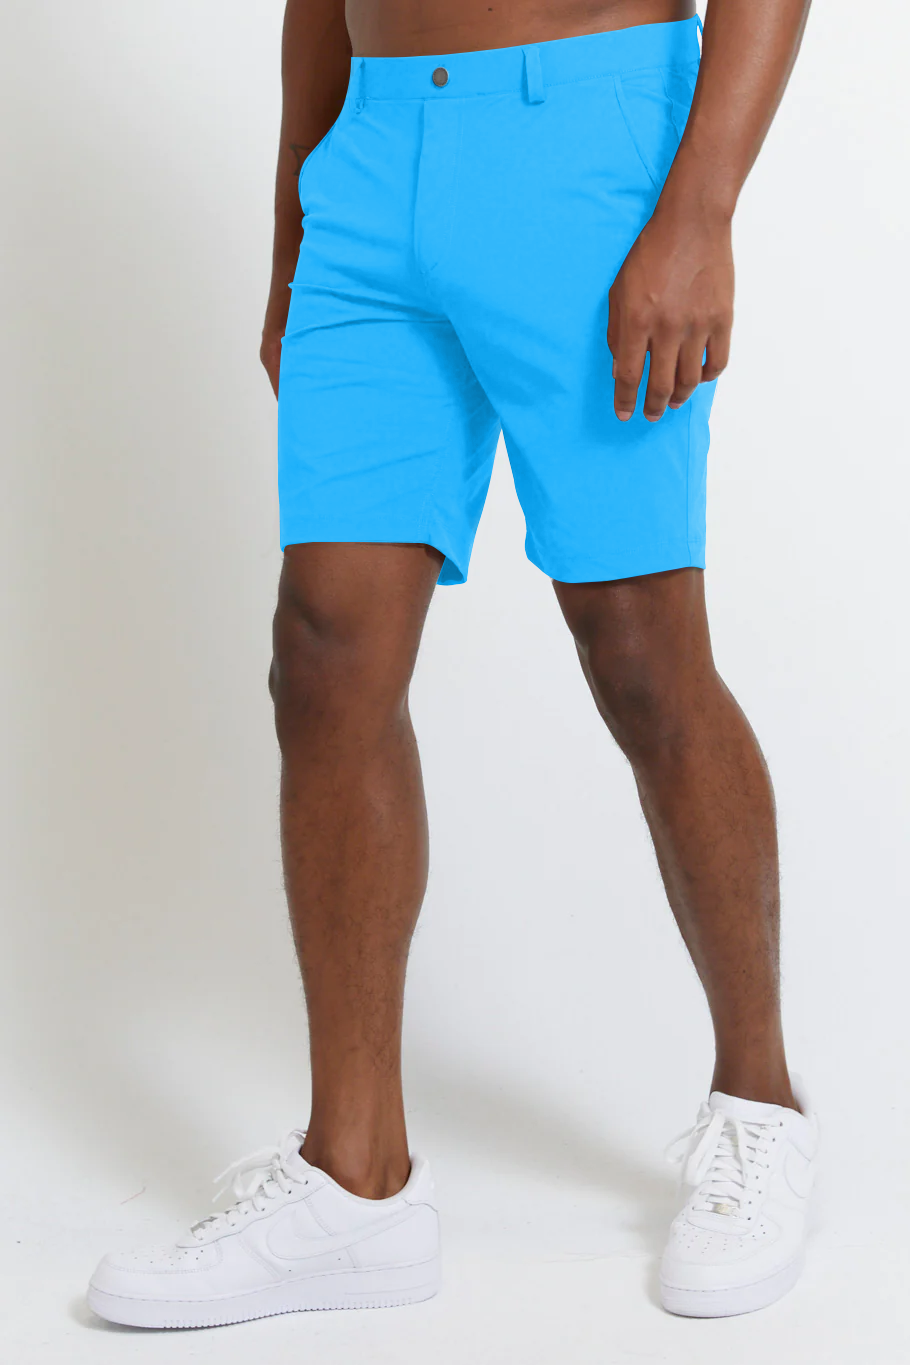 Image of the hanover pull-on short in ibiza blue